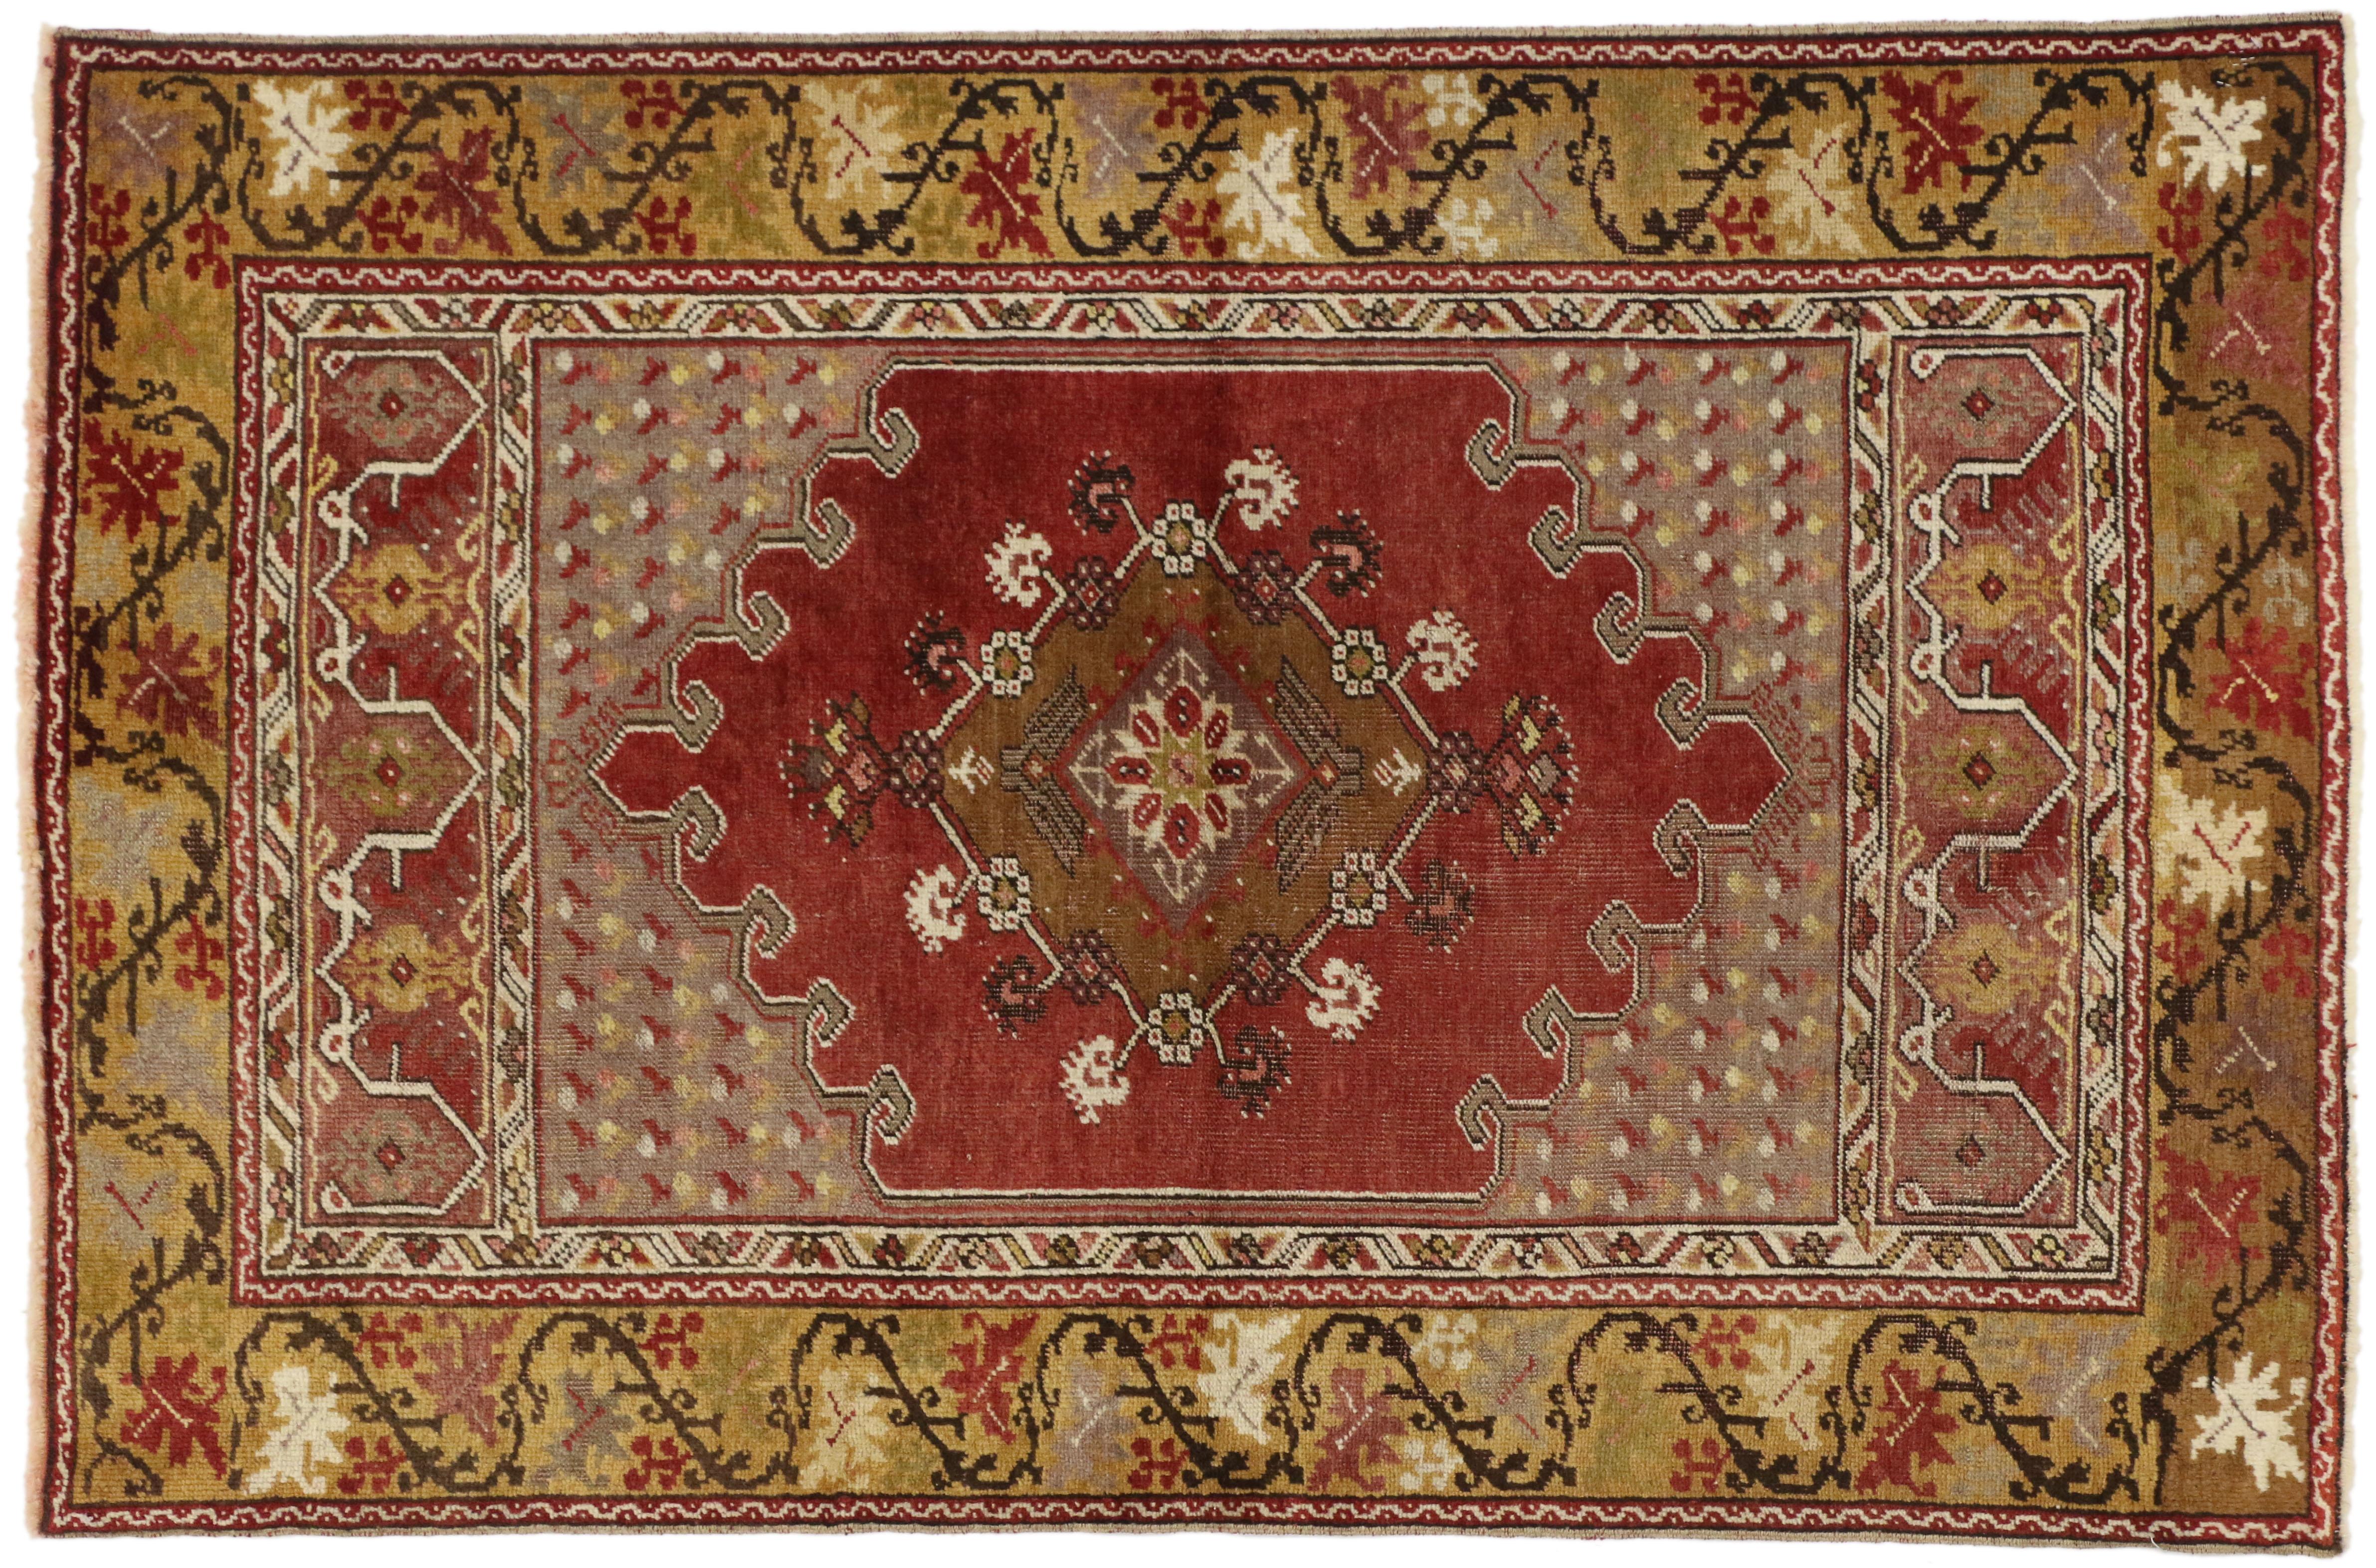 73859 Vintage Turkish Oushak rug, Entry or Foyer rug 03'04 X 05'03. This vintage Turkish Oushak rug features a modern traditional style. Immersed in Anatolian history and refined colors, this vintage Turkish Oushak rug combines simplicity with